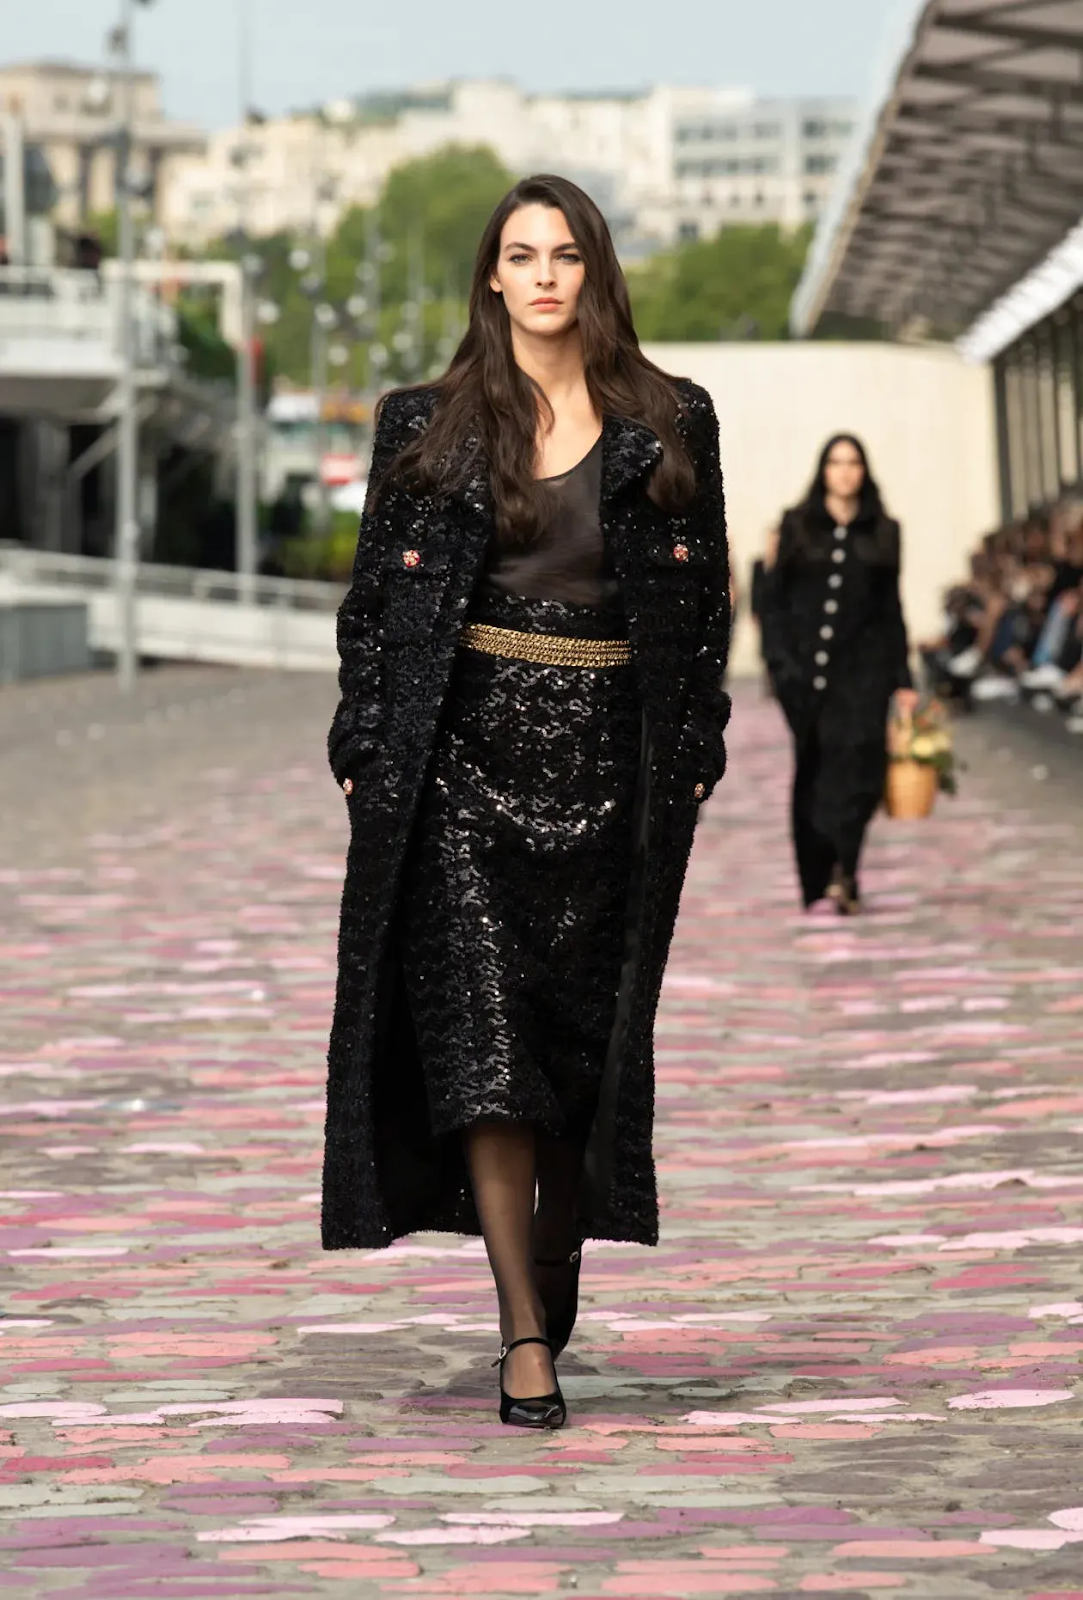 Shimmery dress and long fur coat  looks particularly good on this model as she walked for Chanel